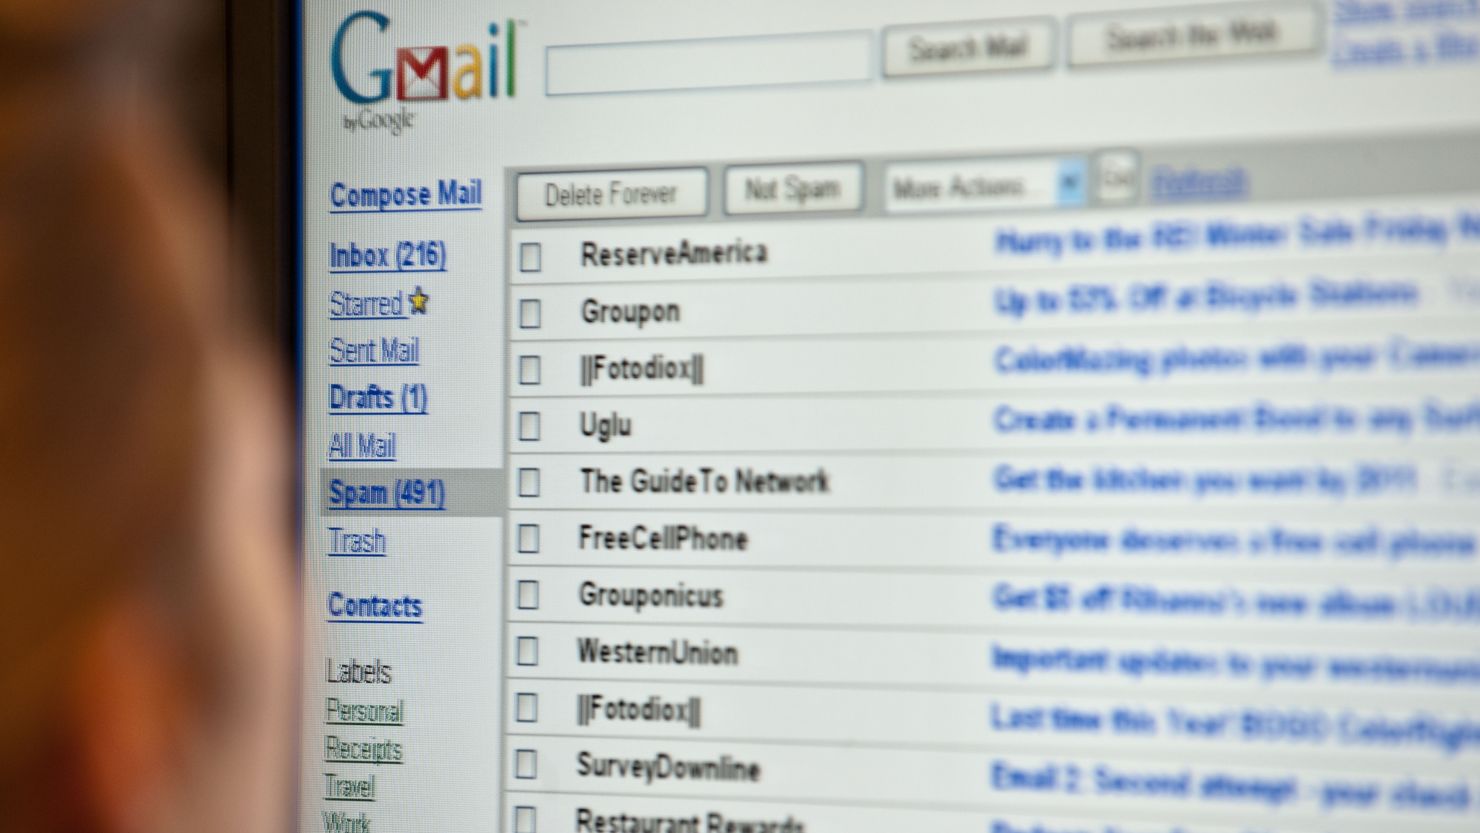 The U.S. made 7,969 requests for users' Gmail and other Google data in the first six months of 2012.